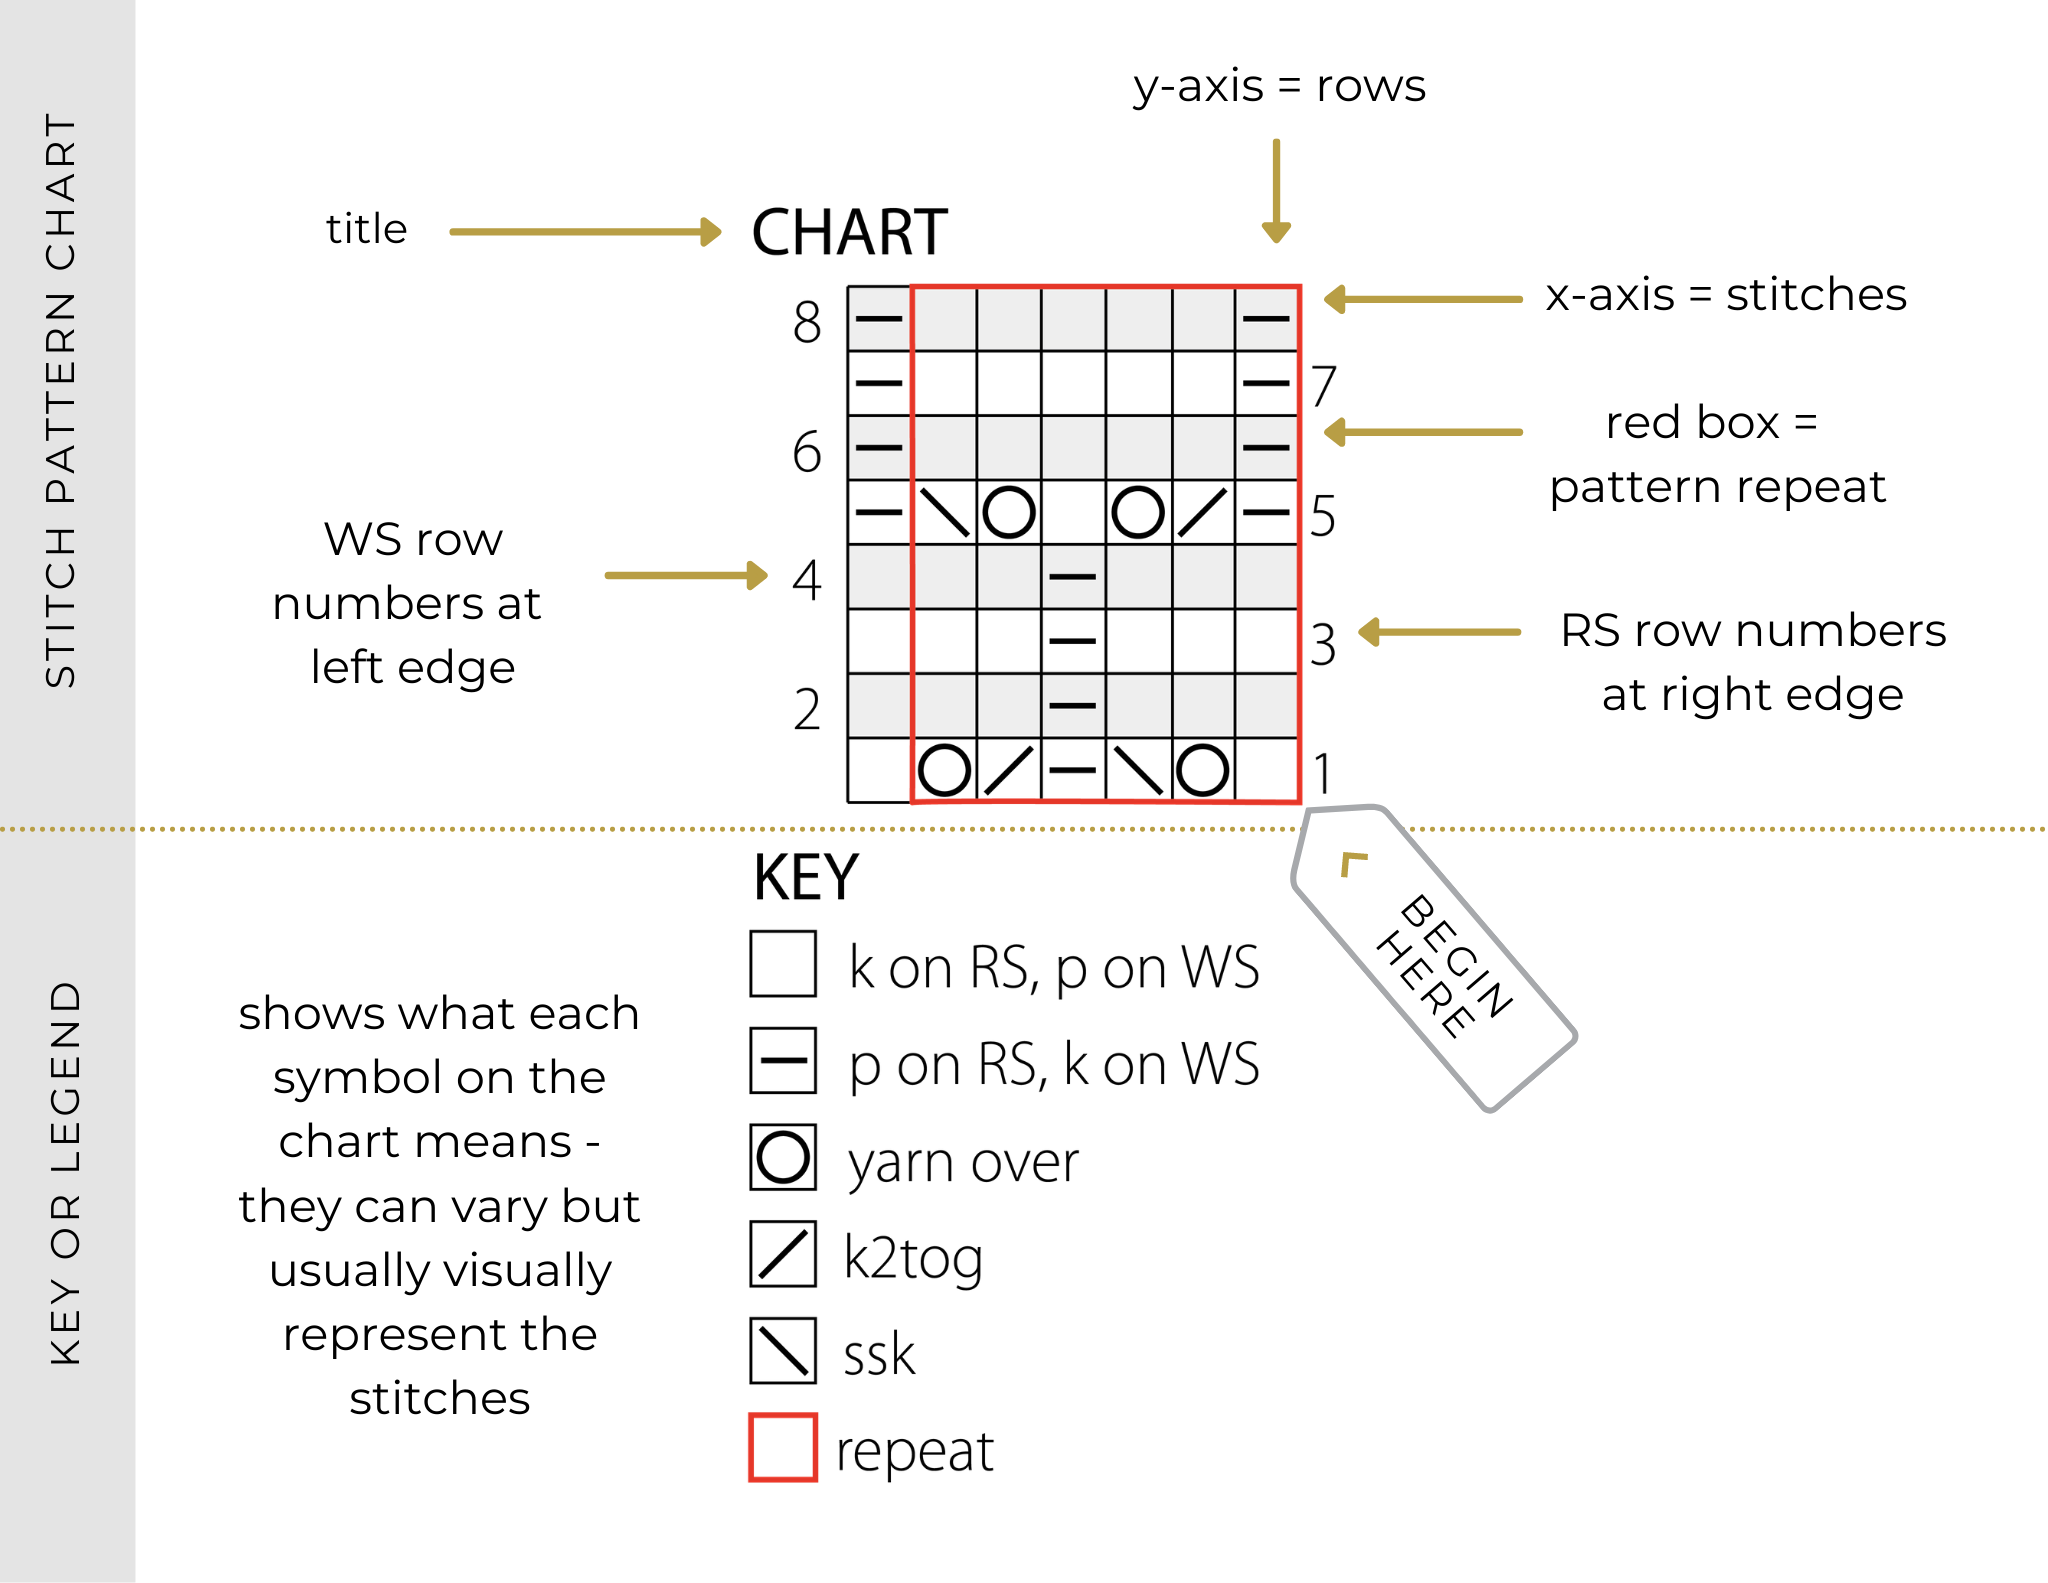 Learn to Knit: How to Read a Knitting Chart - Ysolda